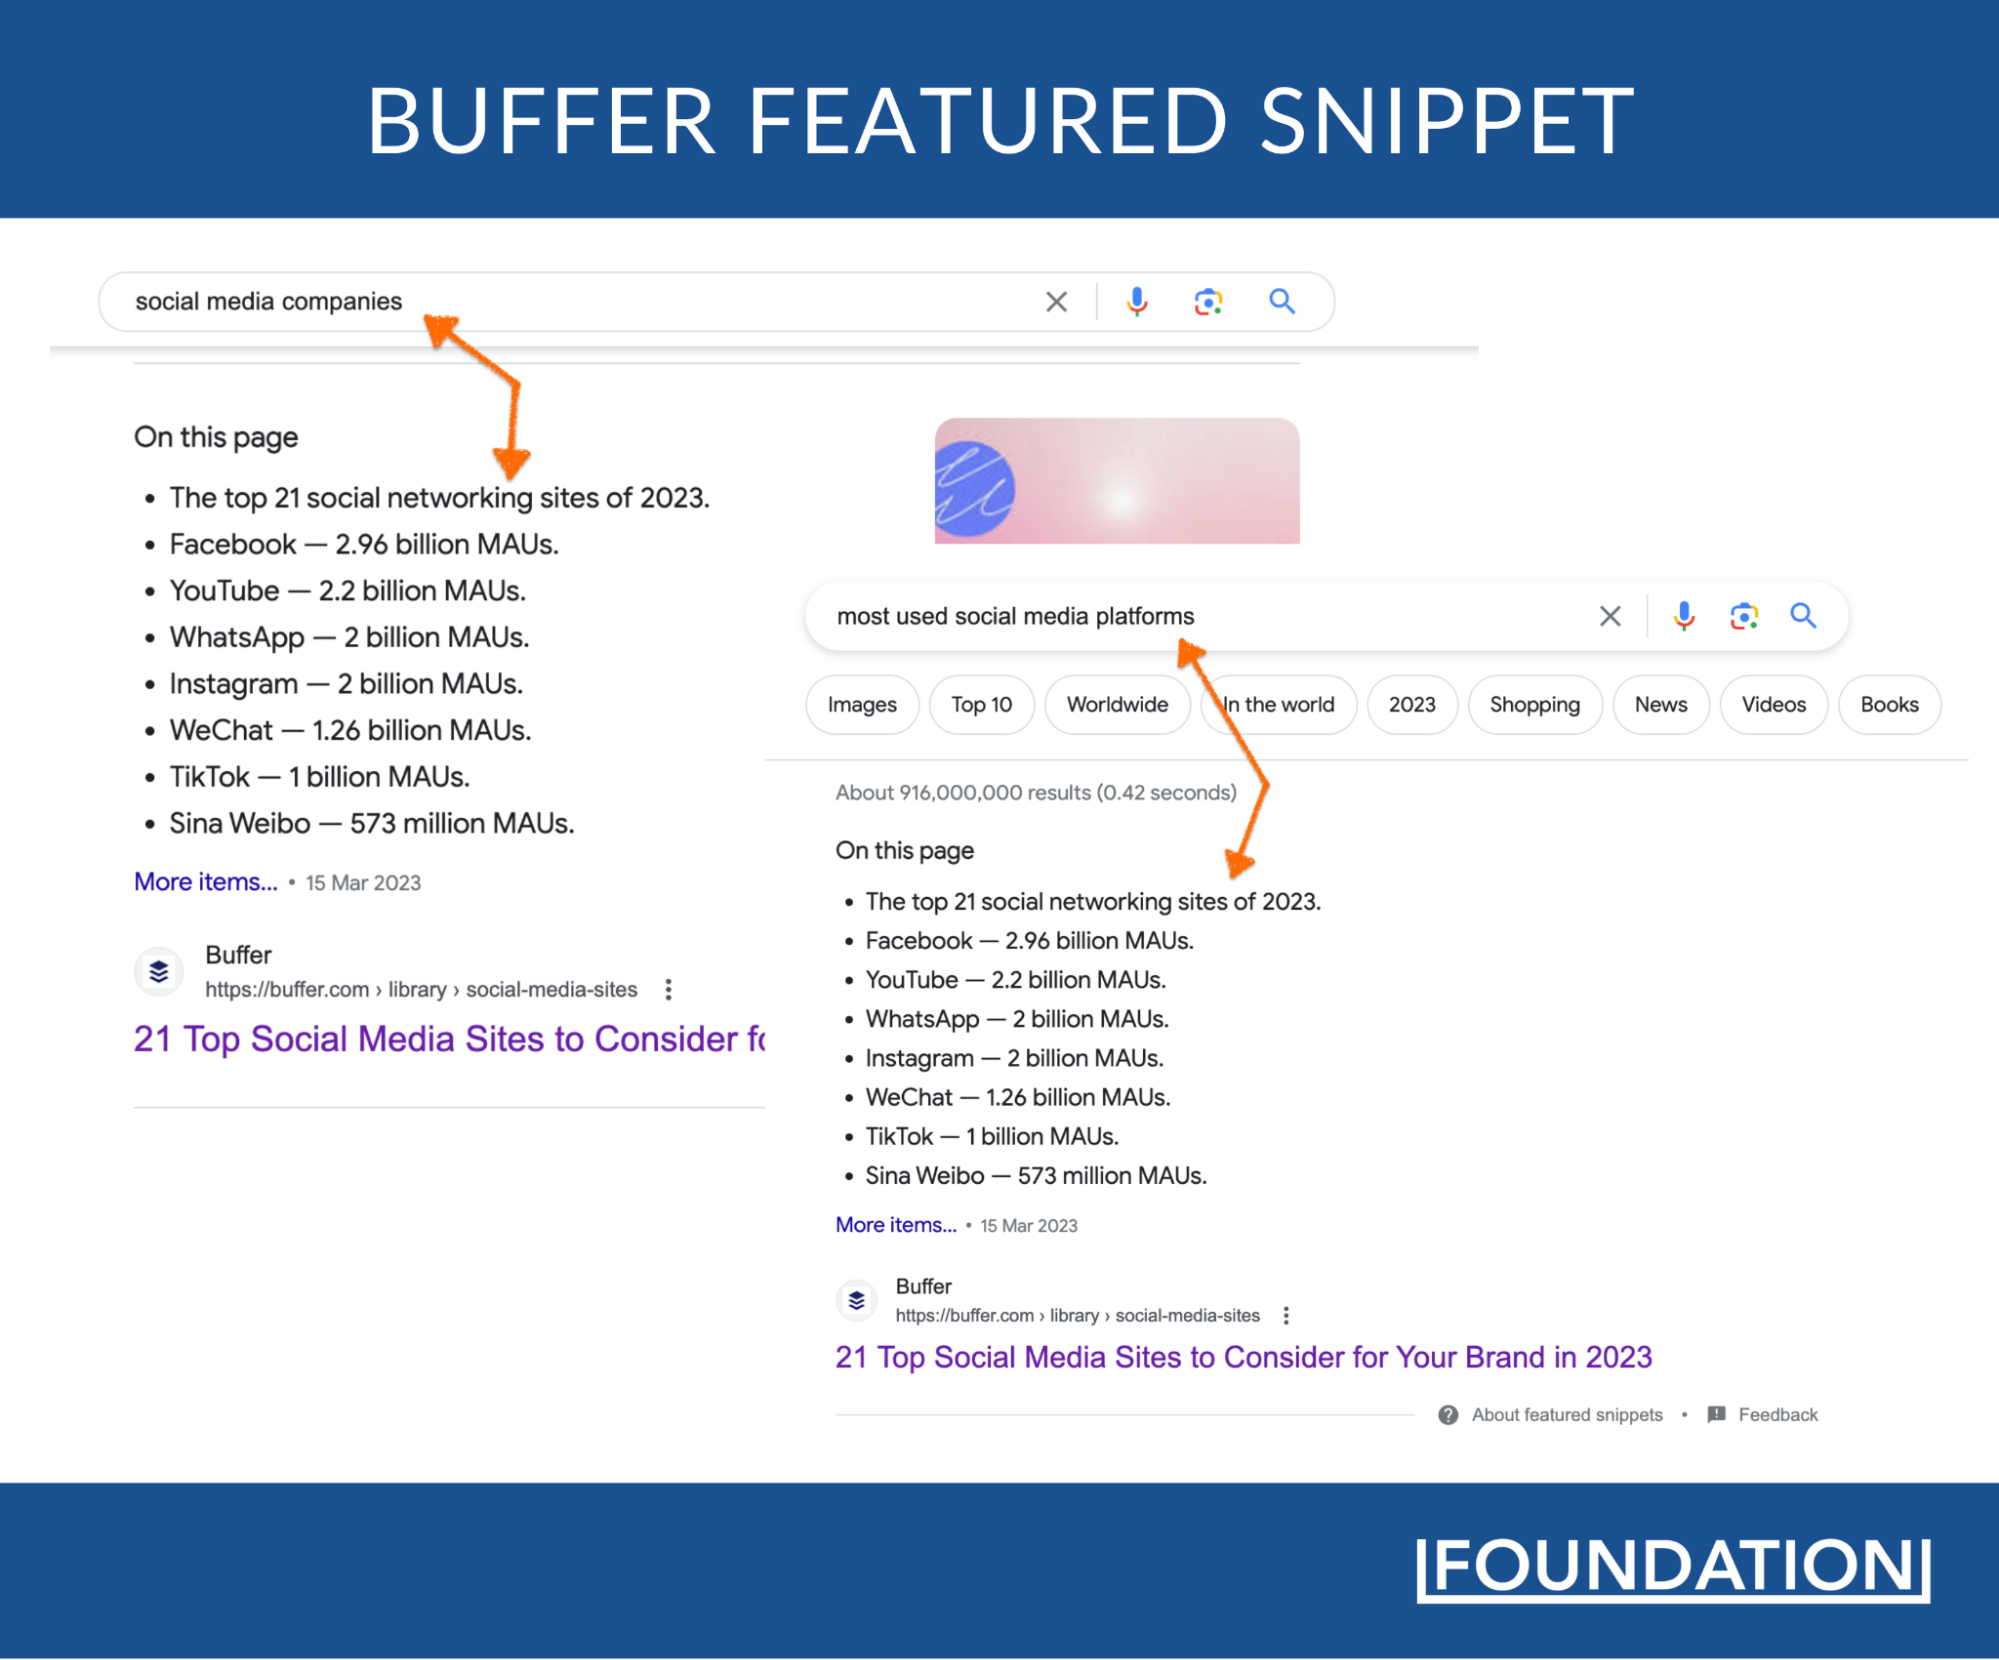 Buffer featured snippet for “social media companies” and “most used social media platforms.”